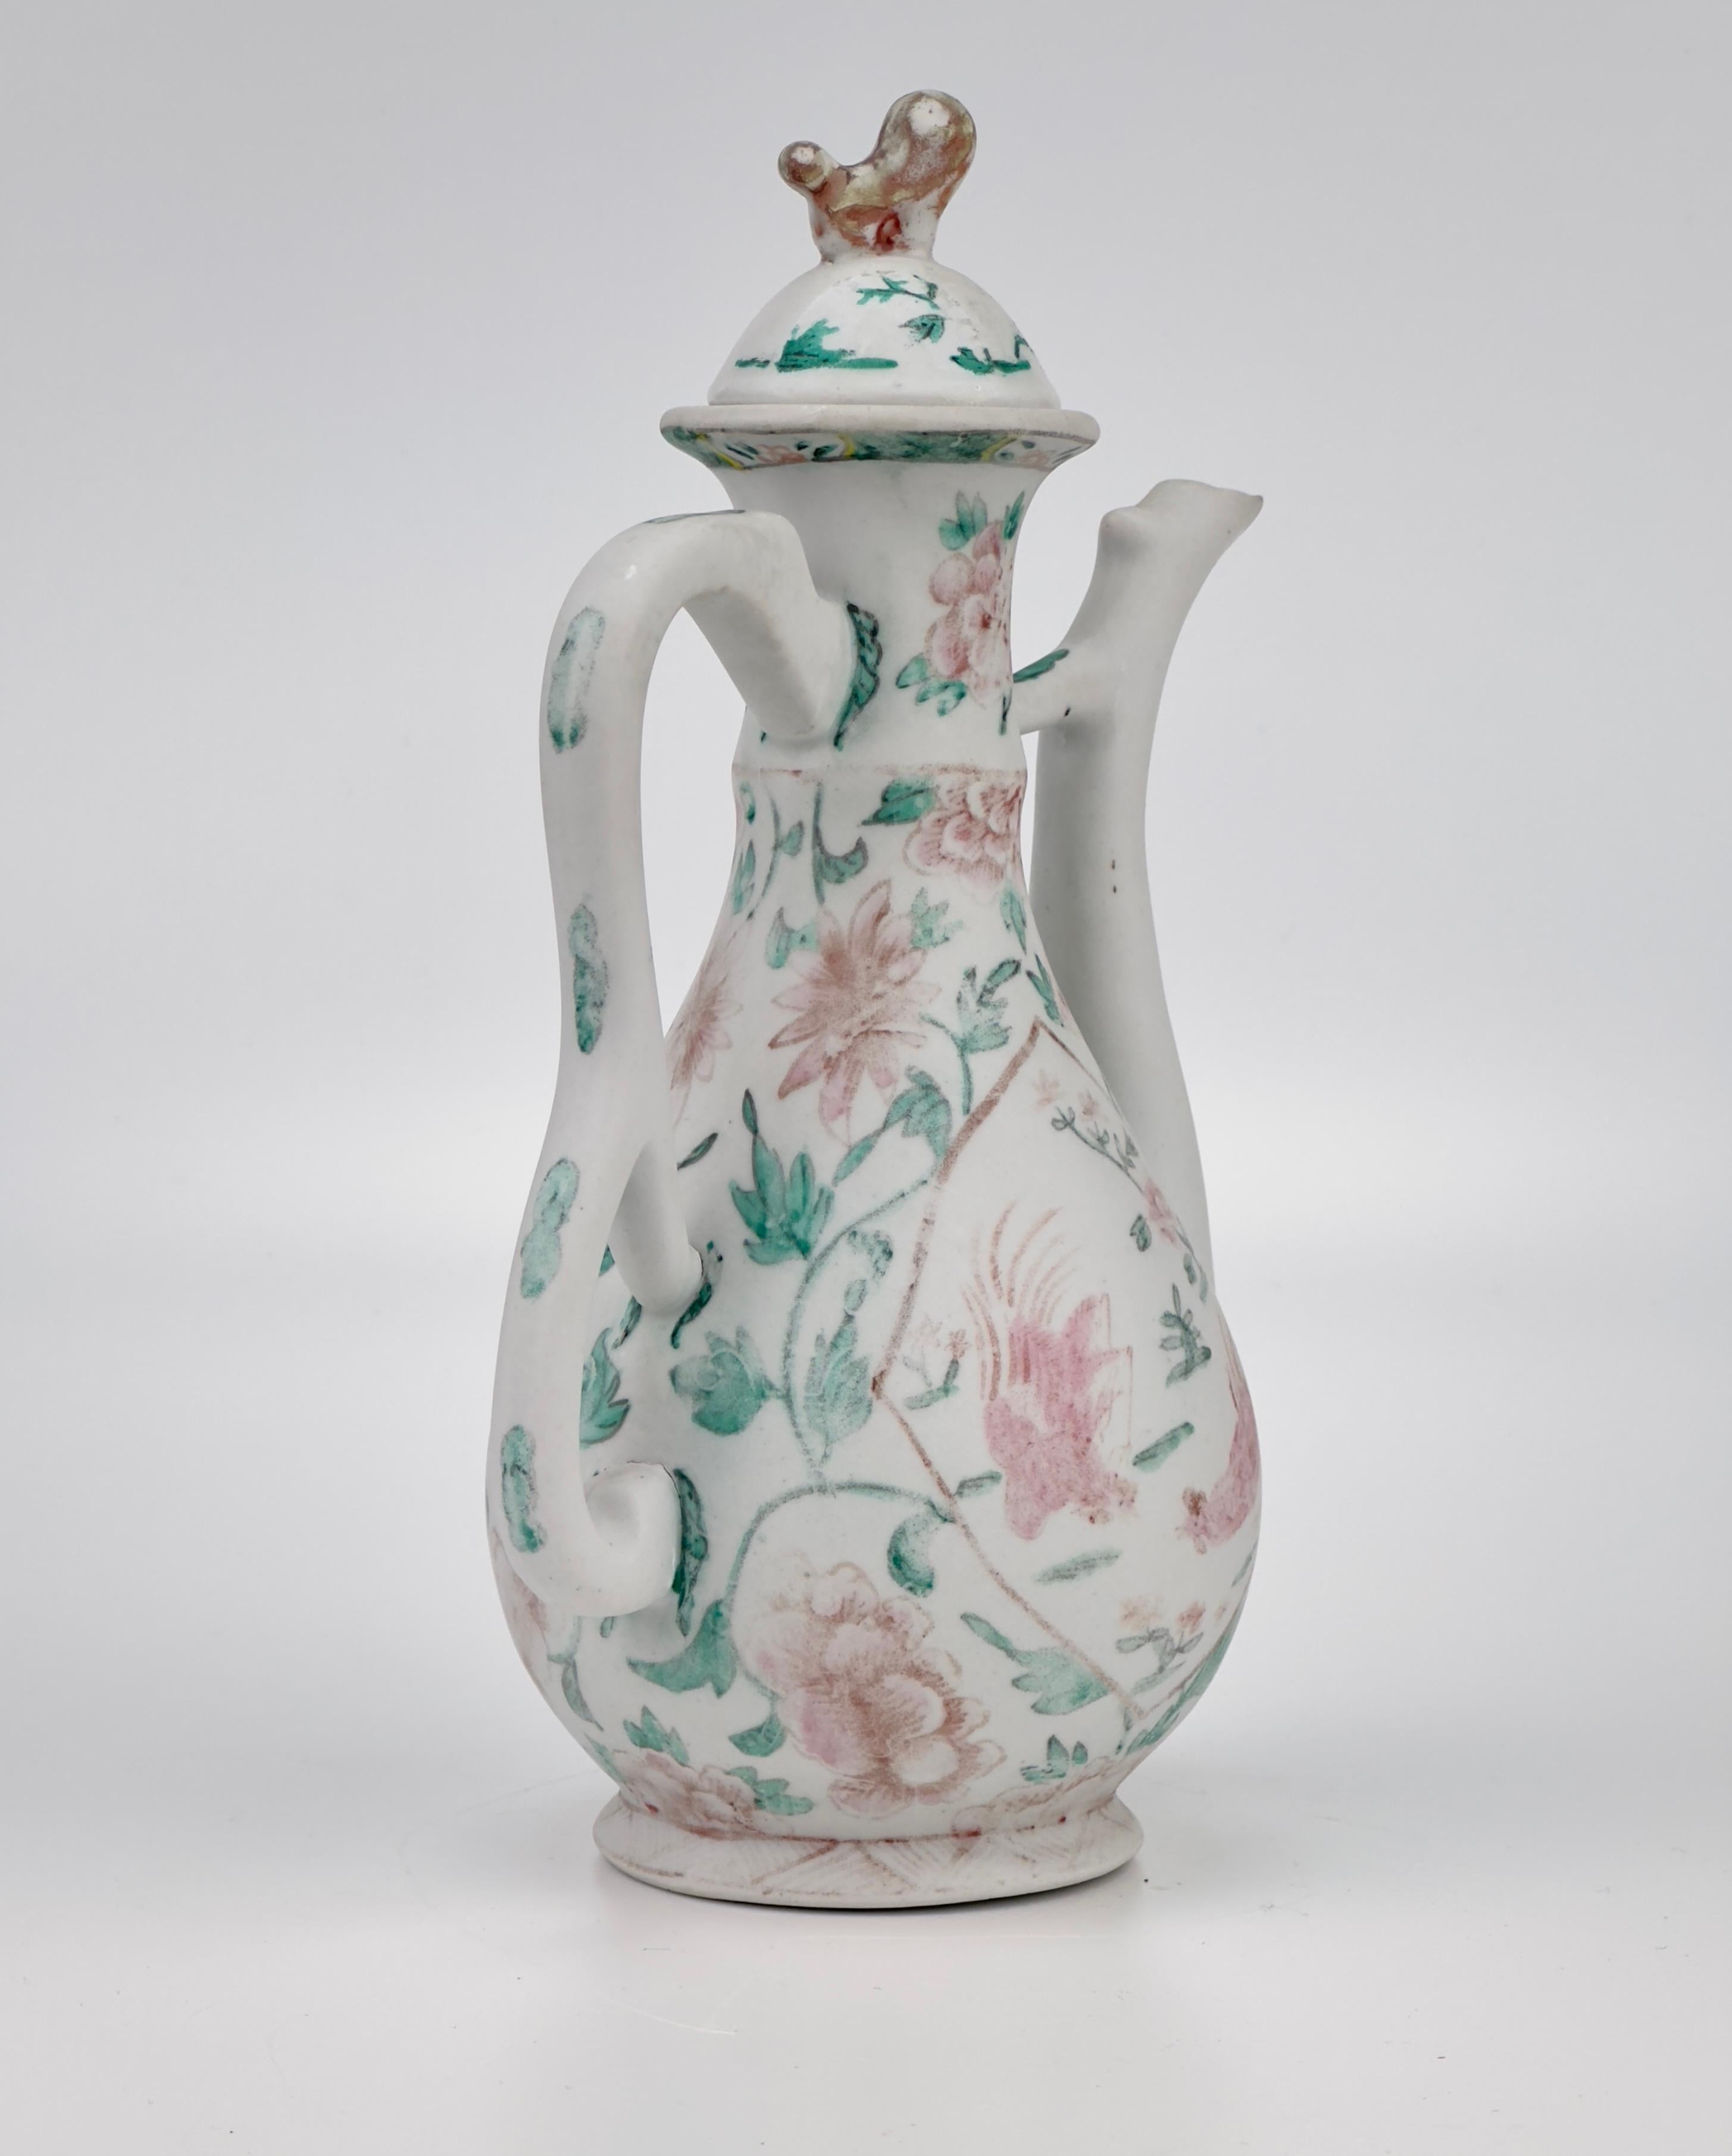 Beautiful 'chickens and flowers' painted familie rose/verte ceramic ewer from Qing dynasty. Excavated from cargo underwater.

Period : Qing Dynasty, Kangxi-Yongzheng Period
Production Date : 17-18th century
Made in : Jingdezhen
Found/Acquired :